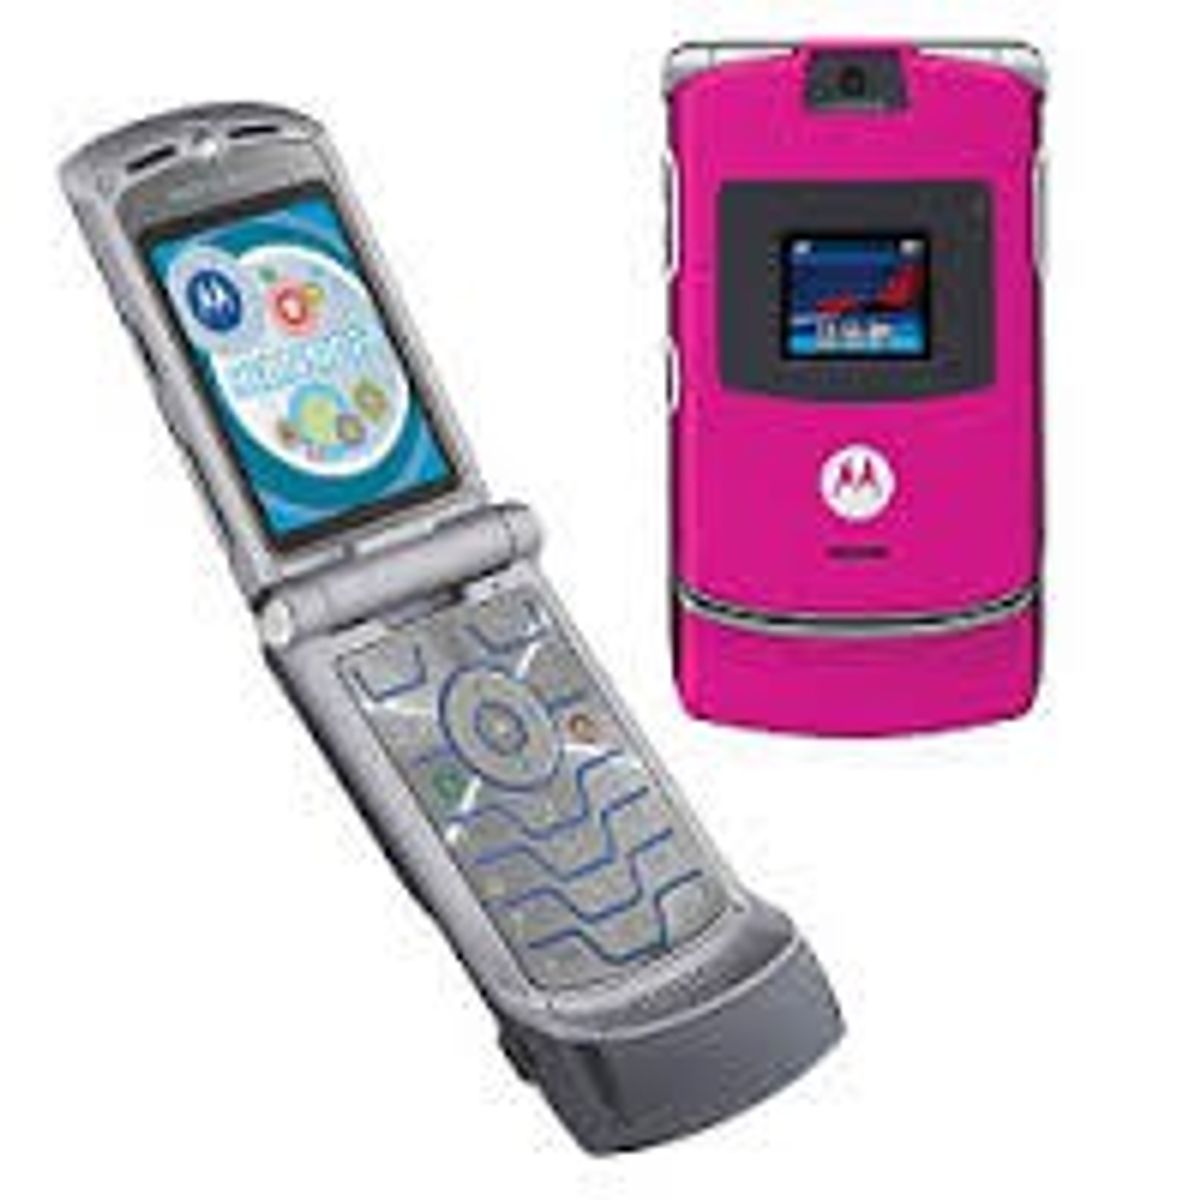 Whatever Happened to...The Flip Phone?